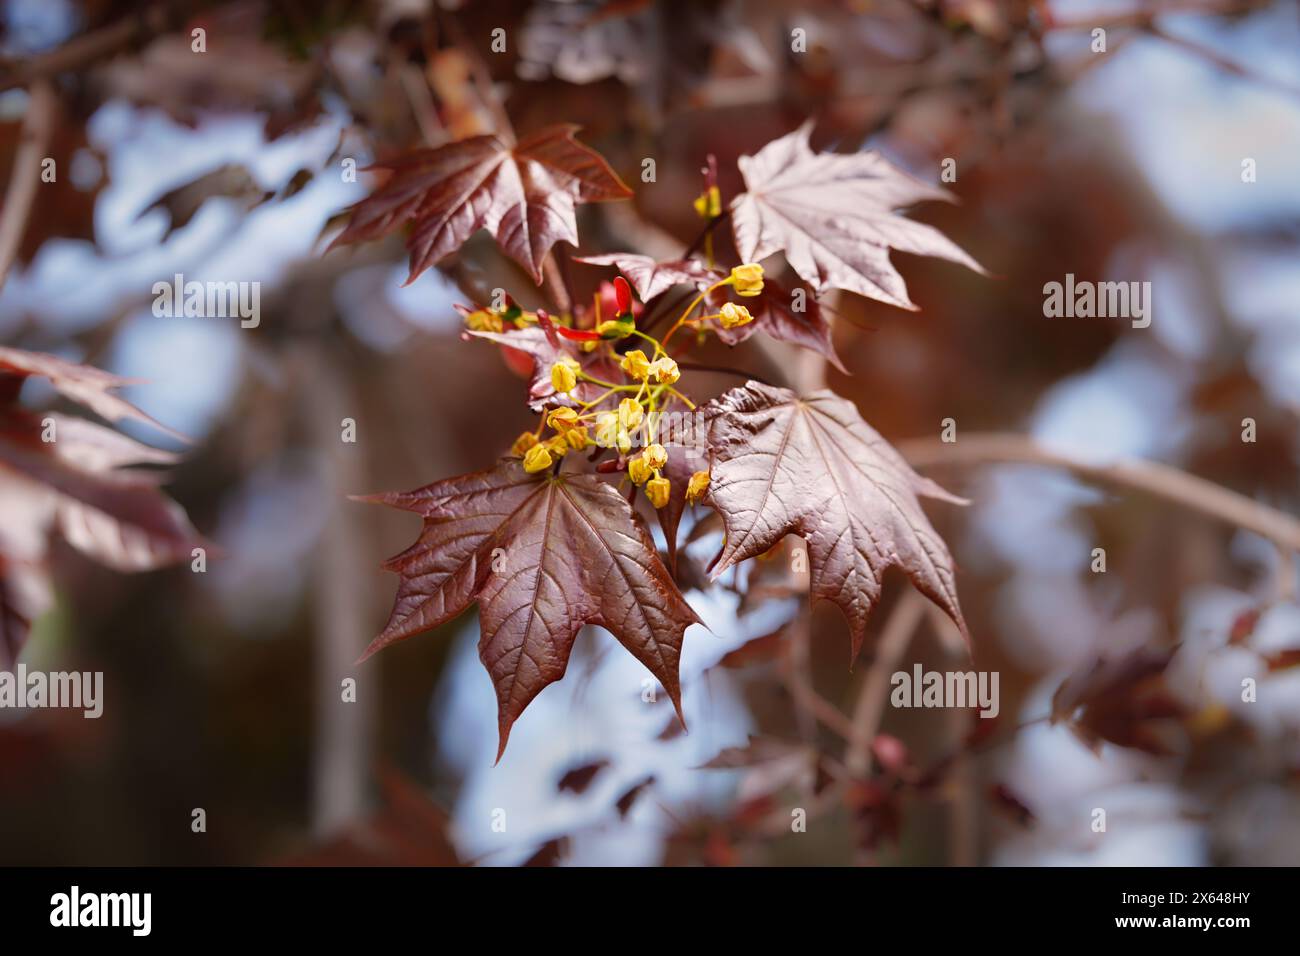 Norway Maple Leaves and Flowers Stock Photo